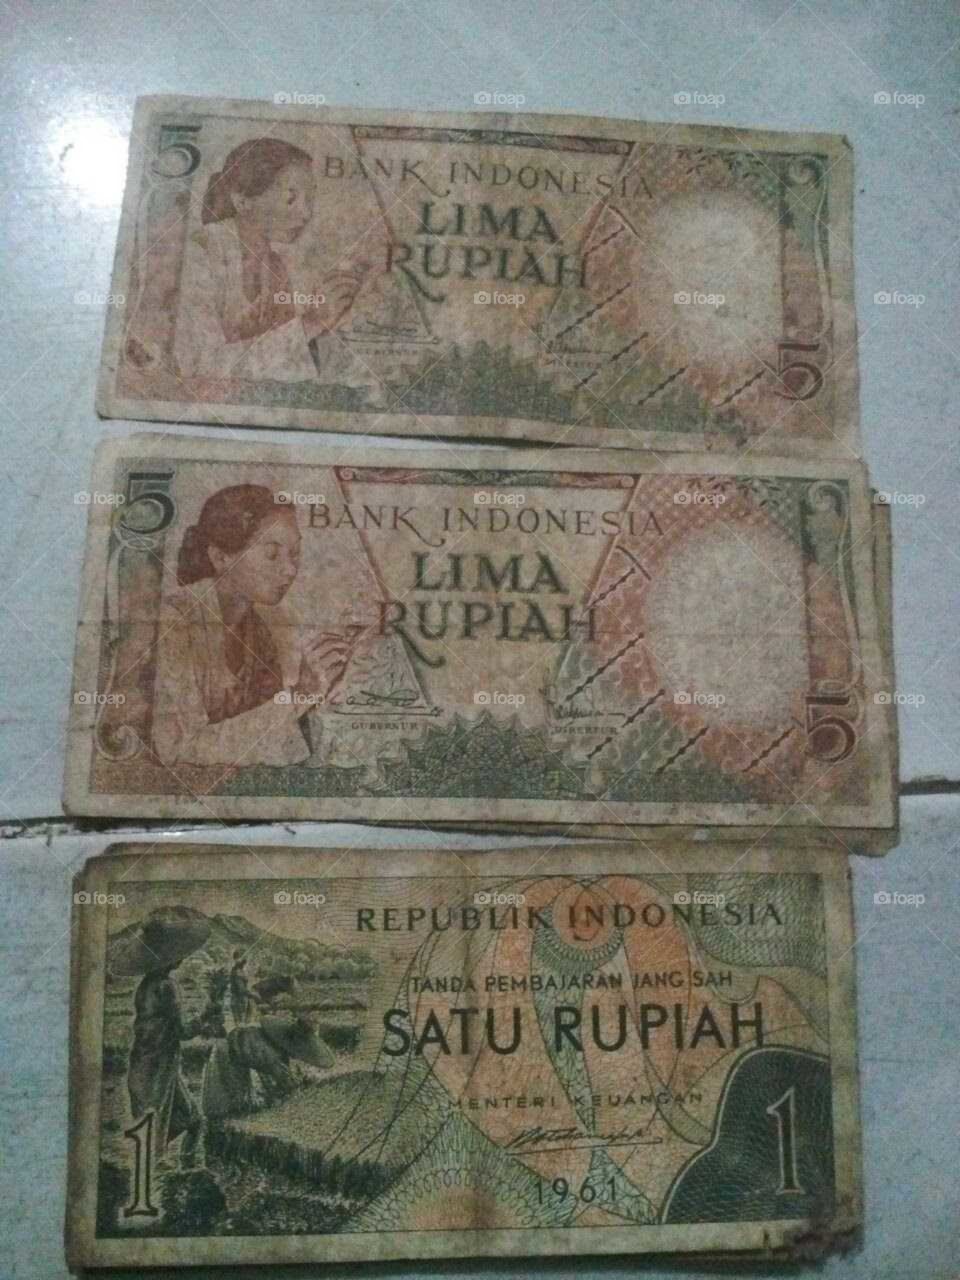 ancient Indonesian currency (ancient money) 5 rupiah and 1 rupiah